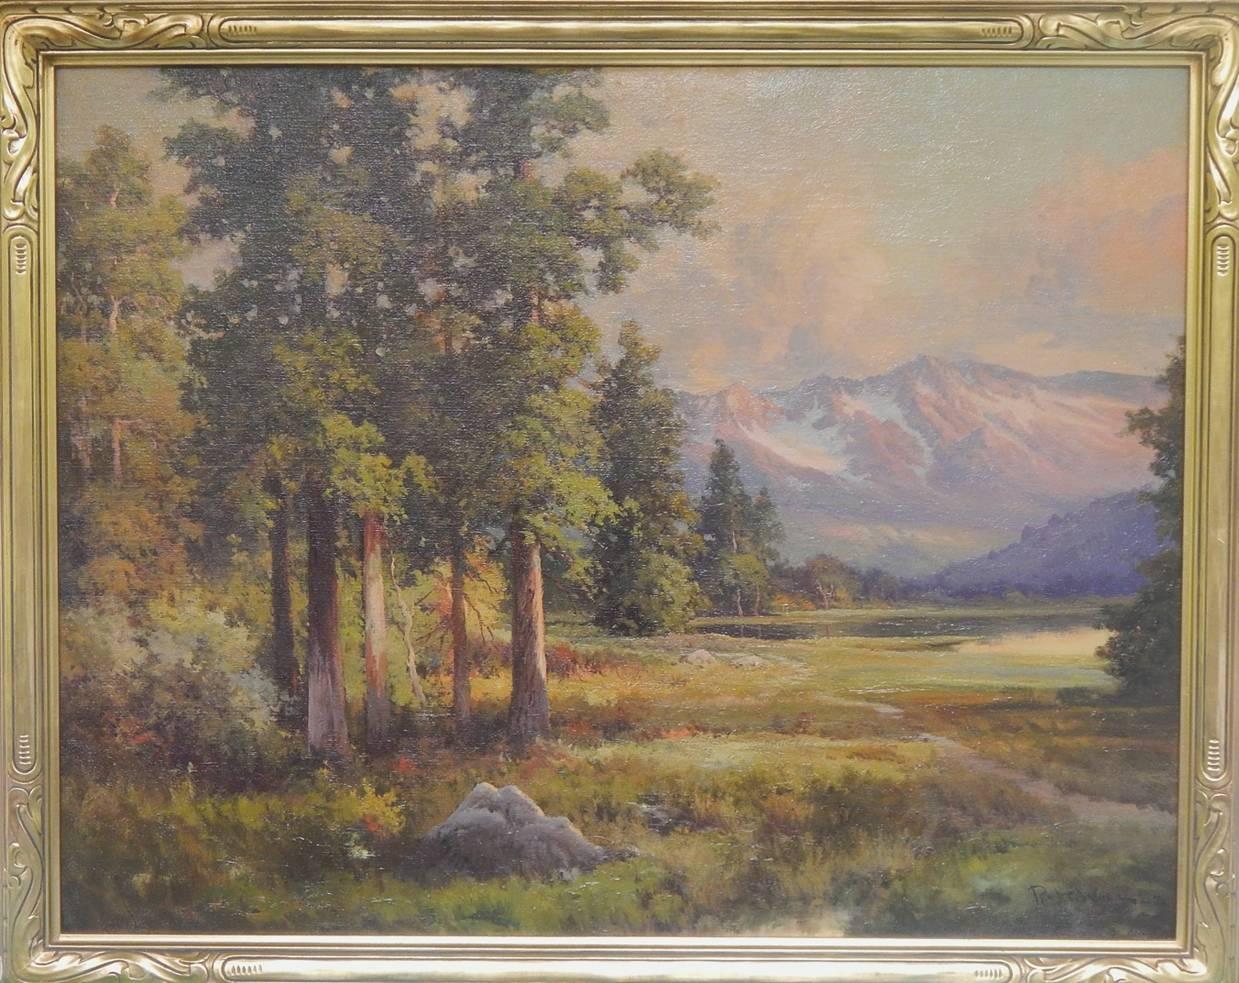 Sunset in the Sierra's 1942 - California Mountain Landscape oil on canvas framed - Painting by Robert William Wood